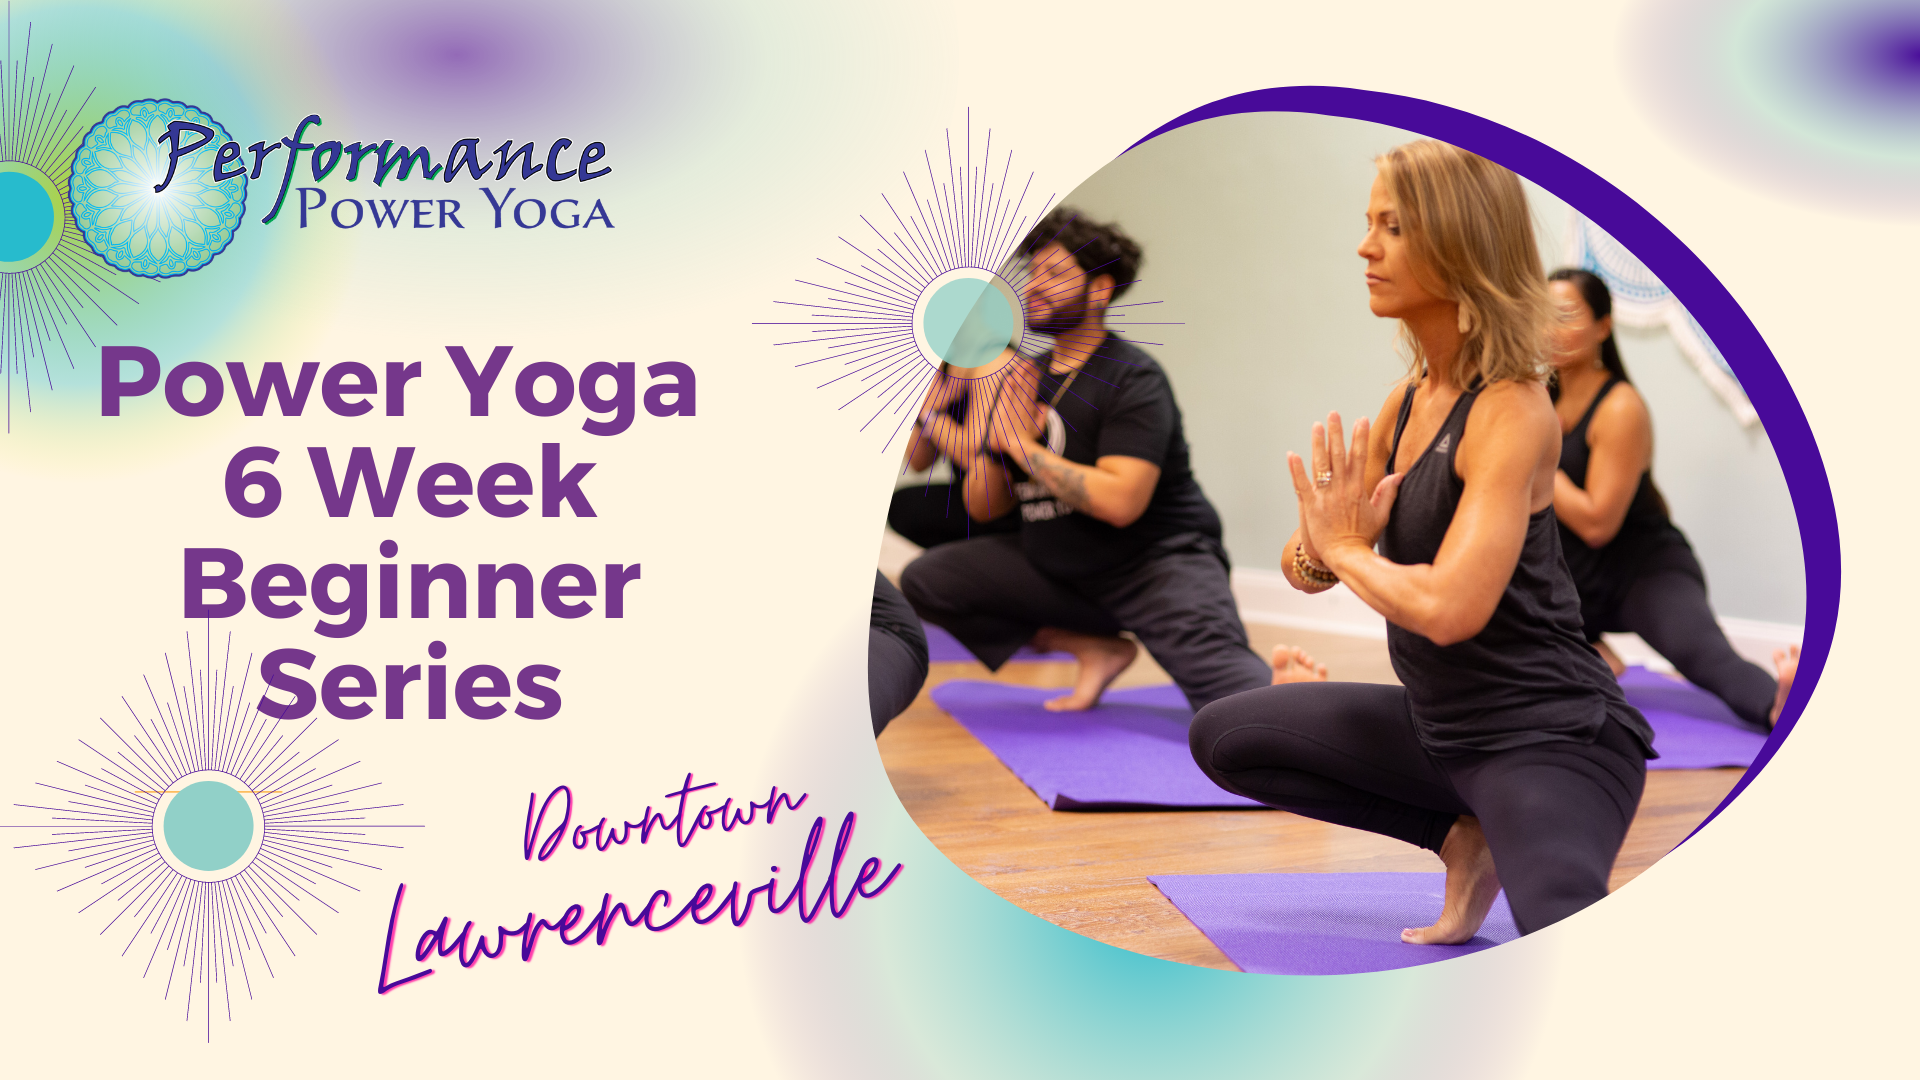 https://performancepoweryoga.com/wp-content/uploads/2021/12/Introduction-to-Power-Yoga-6-Week-Series.png